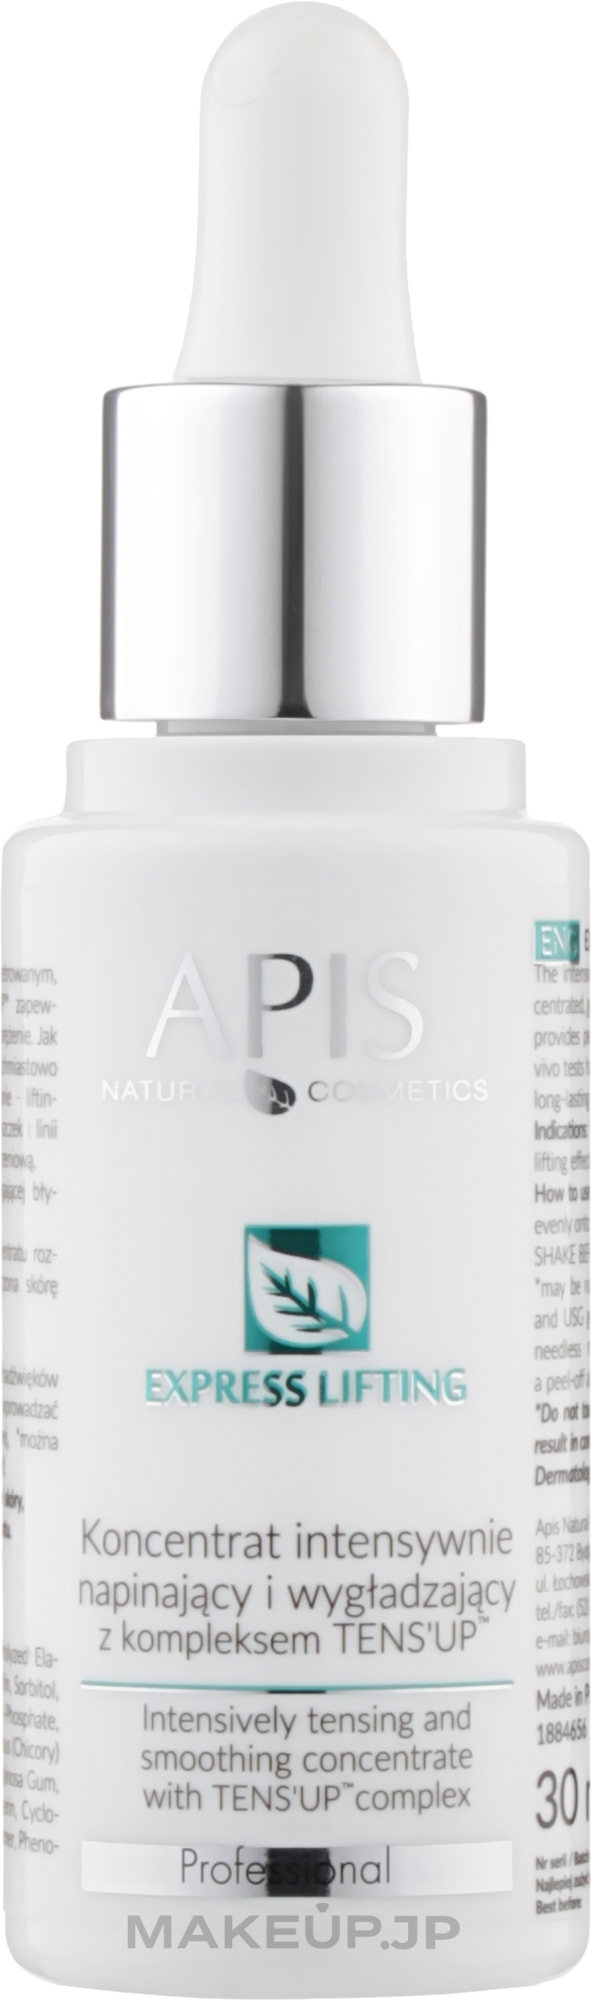 Face Concentrate - APIS Professional Express Lifting Intensive Firming And Smoothing Concentrate With Tens UP — photo 30 ml